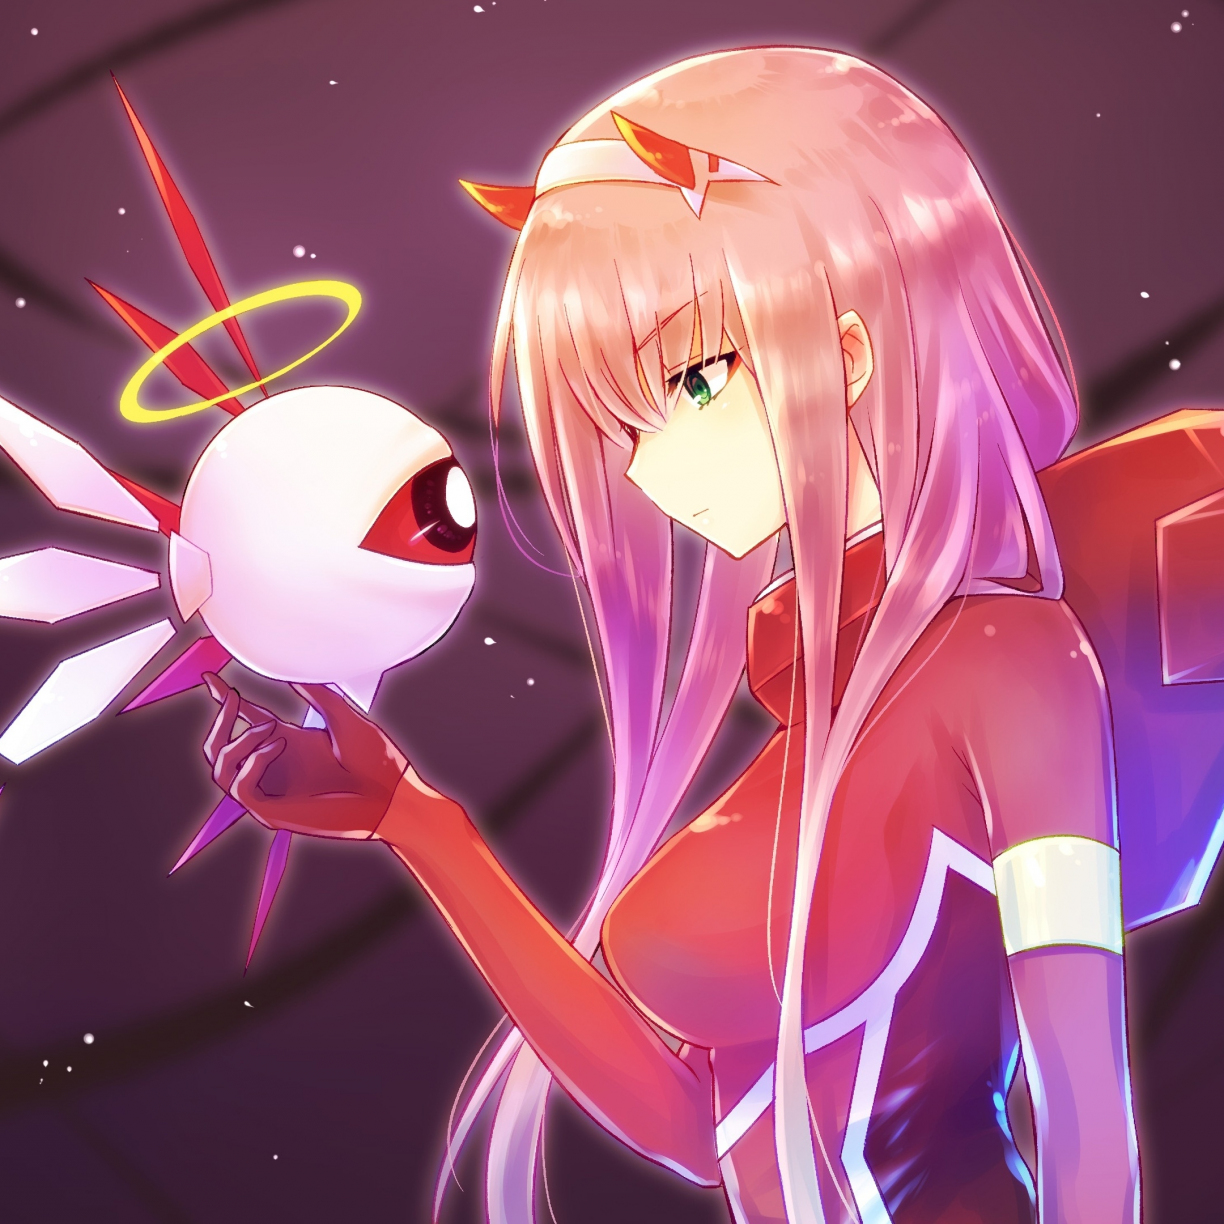 Anime Girl Robot Zero Two Long Hair Wallpaper Hd Image Picture Background 414432 